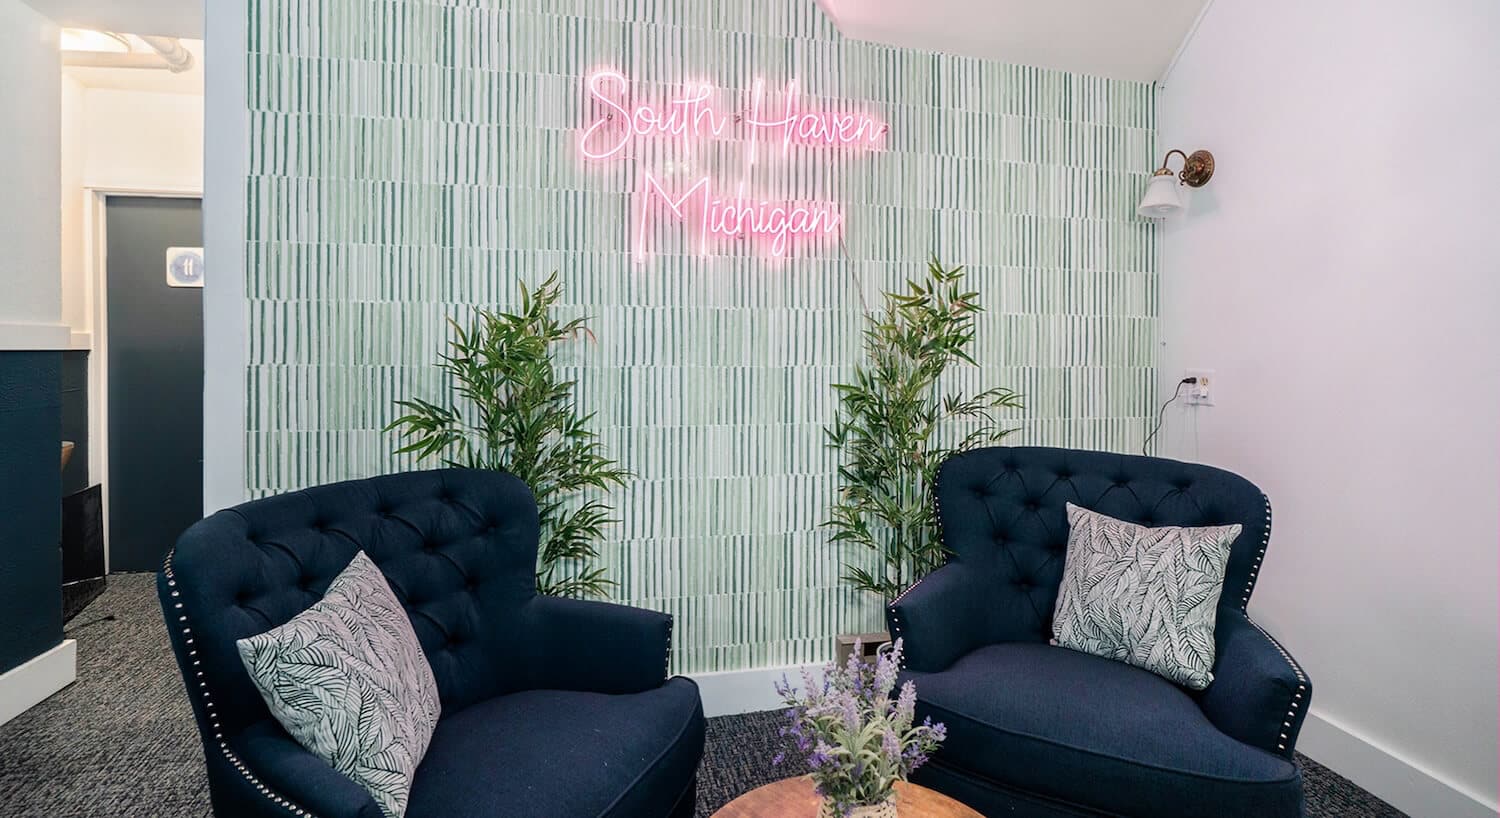 A sitting area in the corner of a room with plush dark blue wingback chairs, a wall with green wallpaper and a neon sign that says South Haven Michigan.